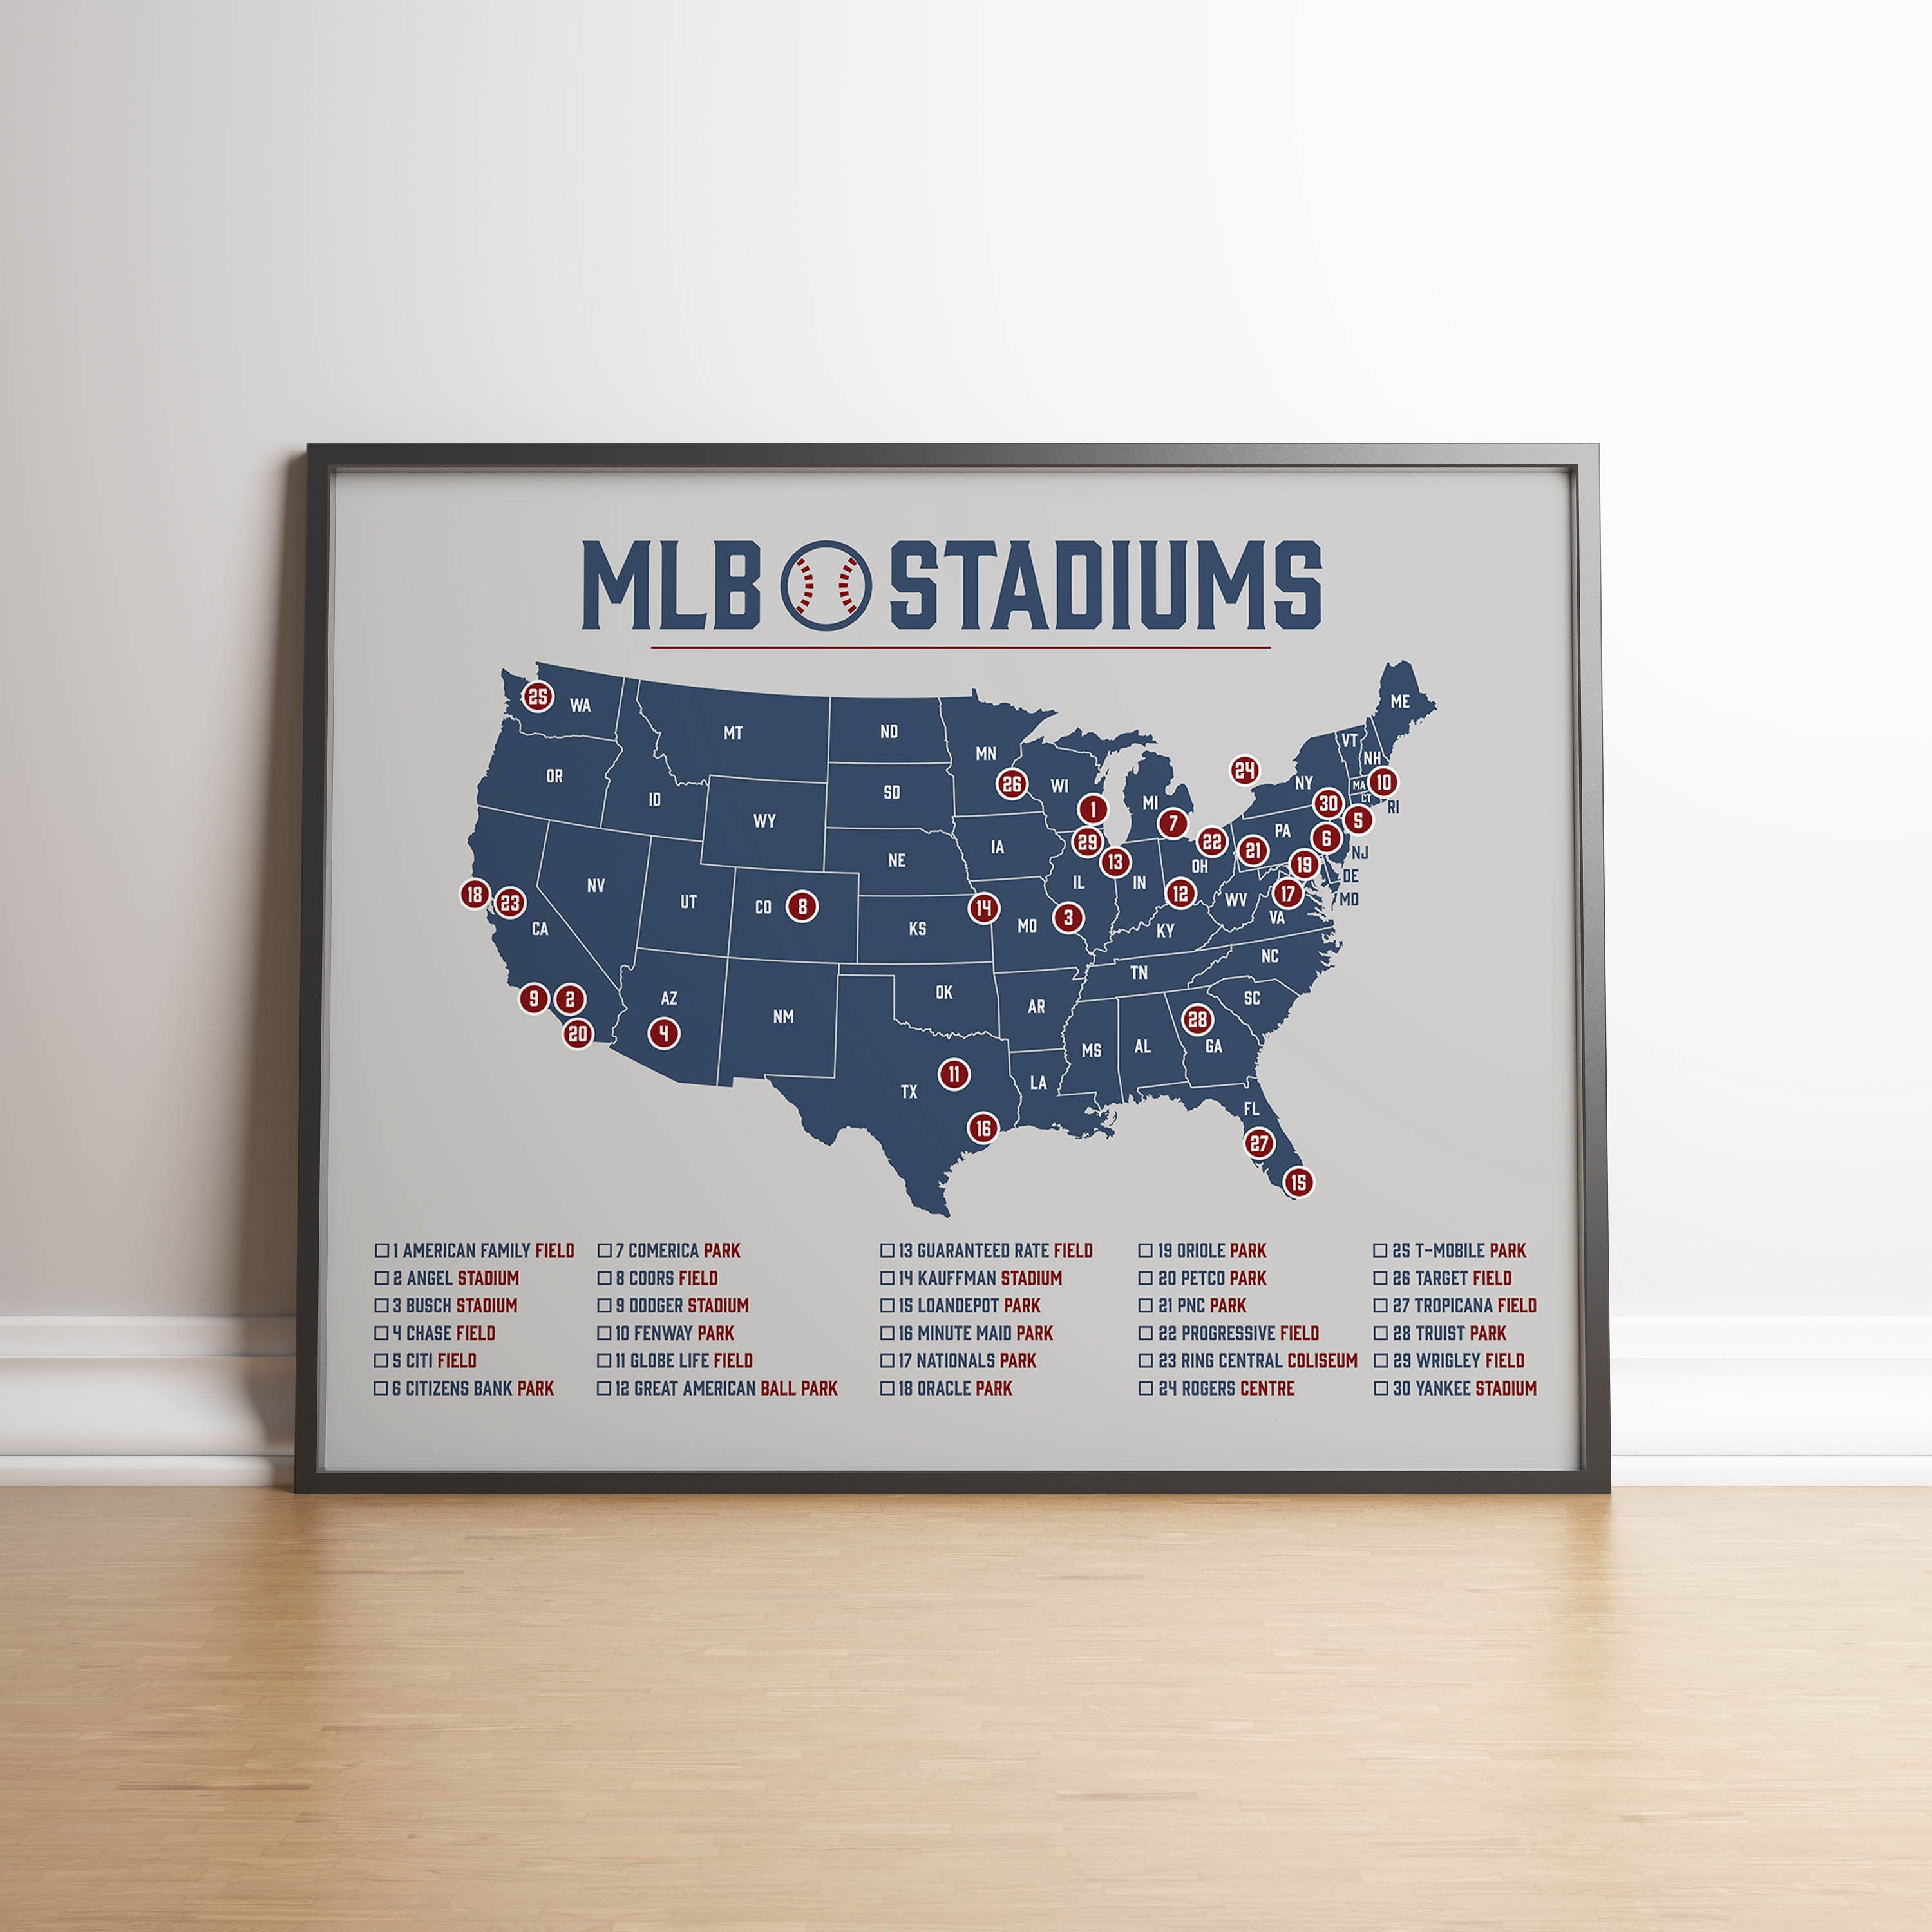 Major League Baseball Travel Map  Mark your travels to your favorite MLB  baseball stadiums  Great Gift for Sports Fans  US Map Poster 24x17 beige  Buy Online at Best Price